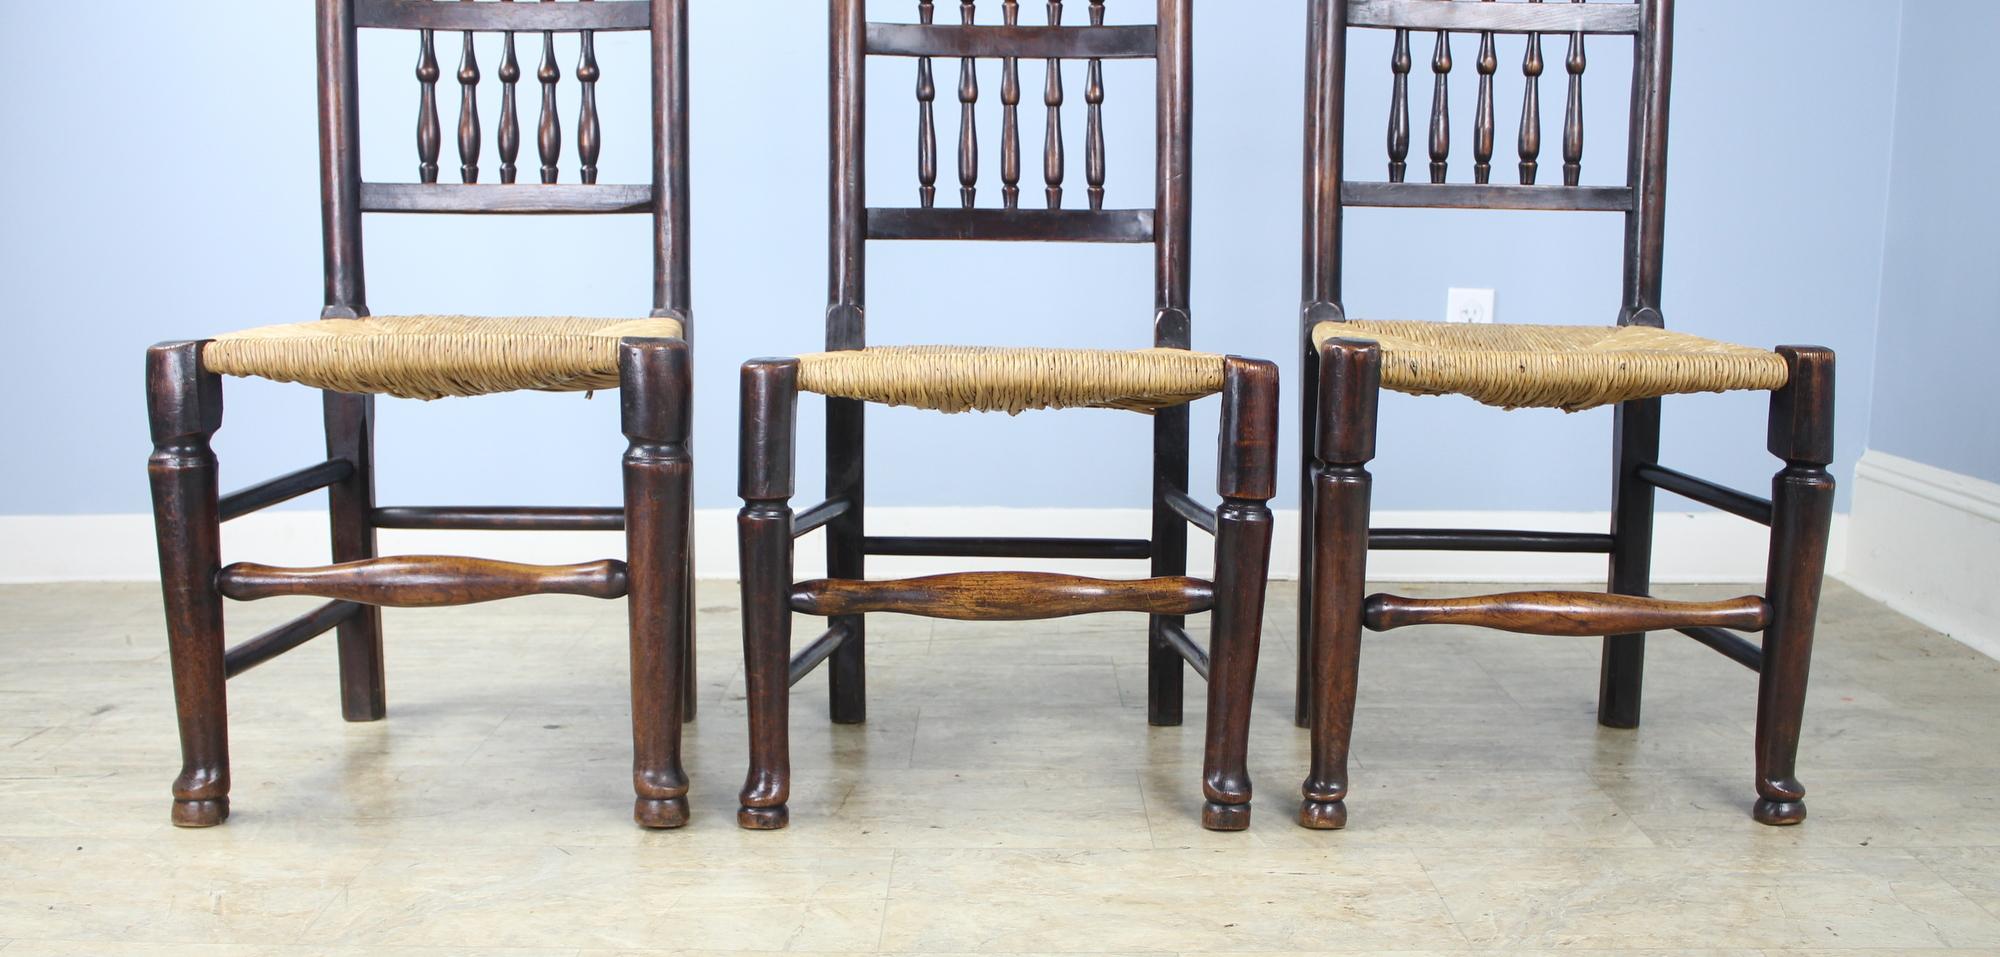 Collection of Eight Early 19th Century Ash and Elm Lancashire Spindleback Chairs For Sale 3